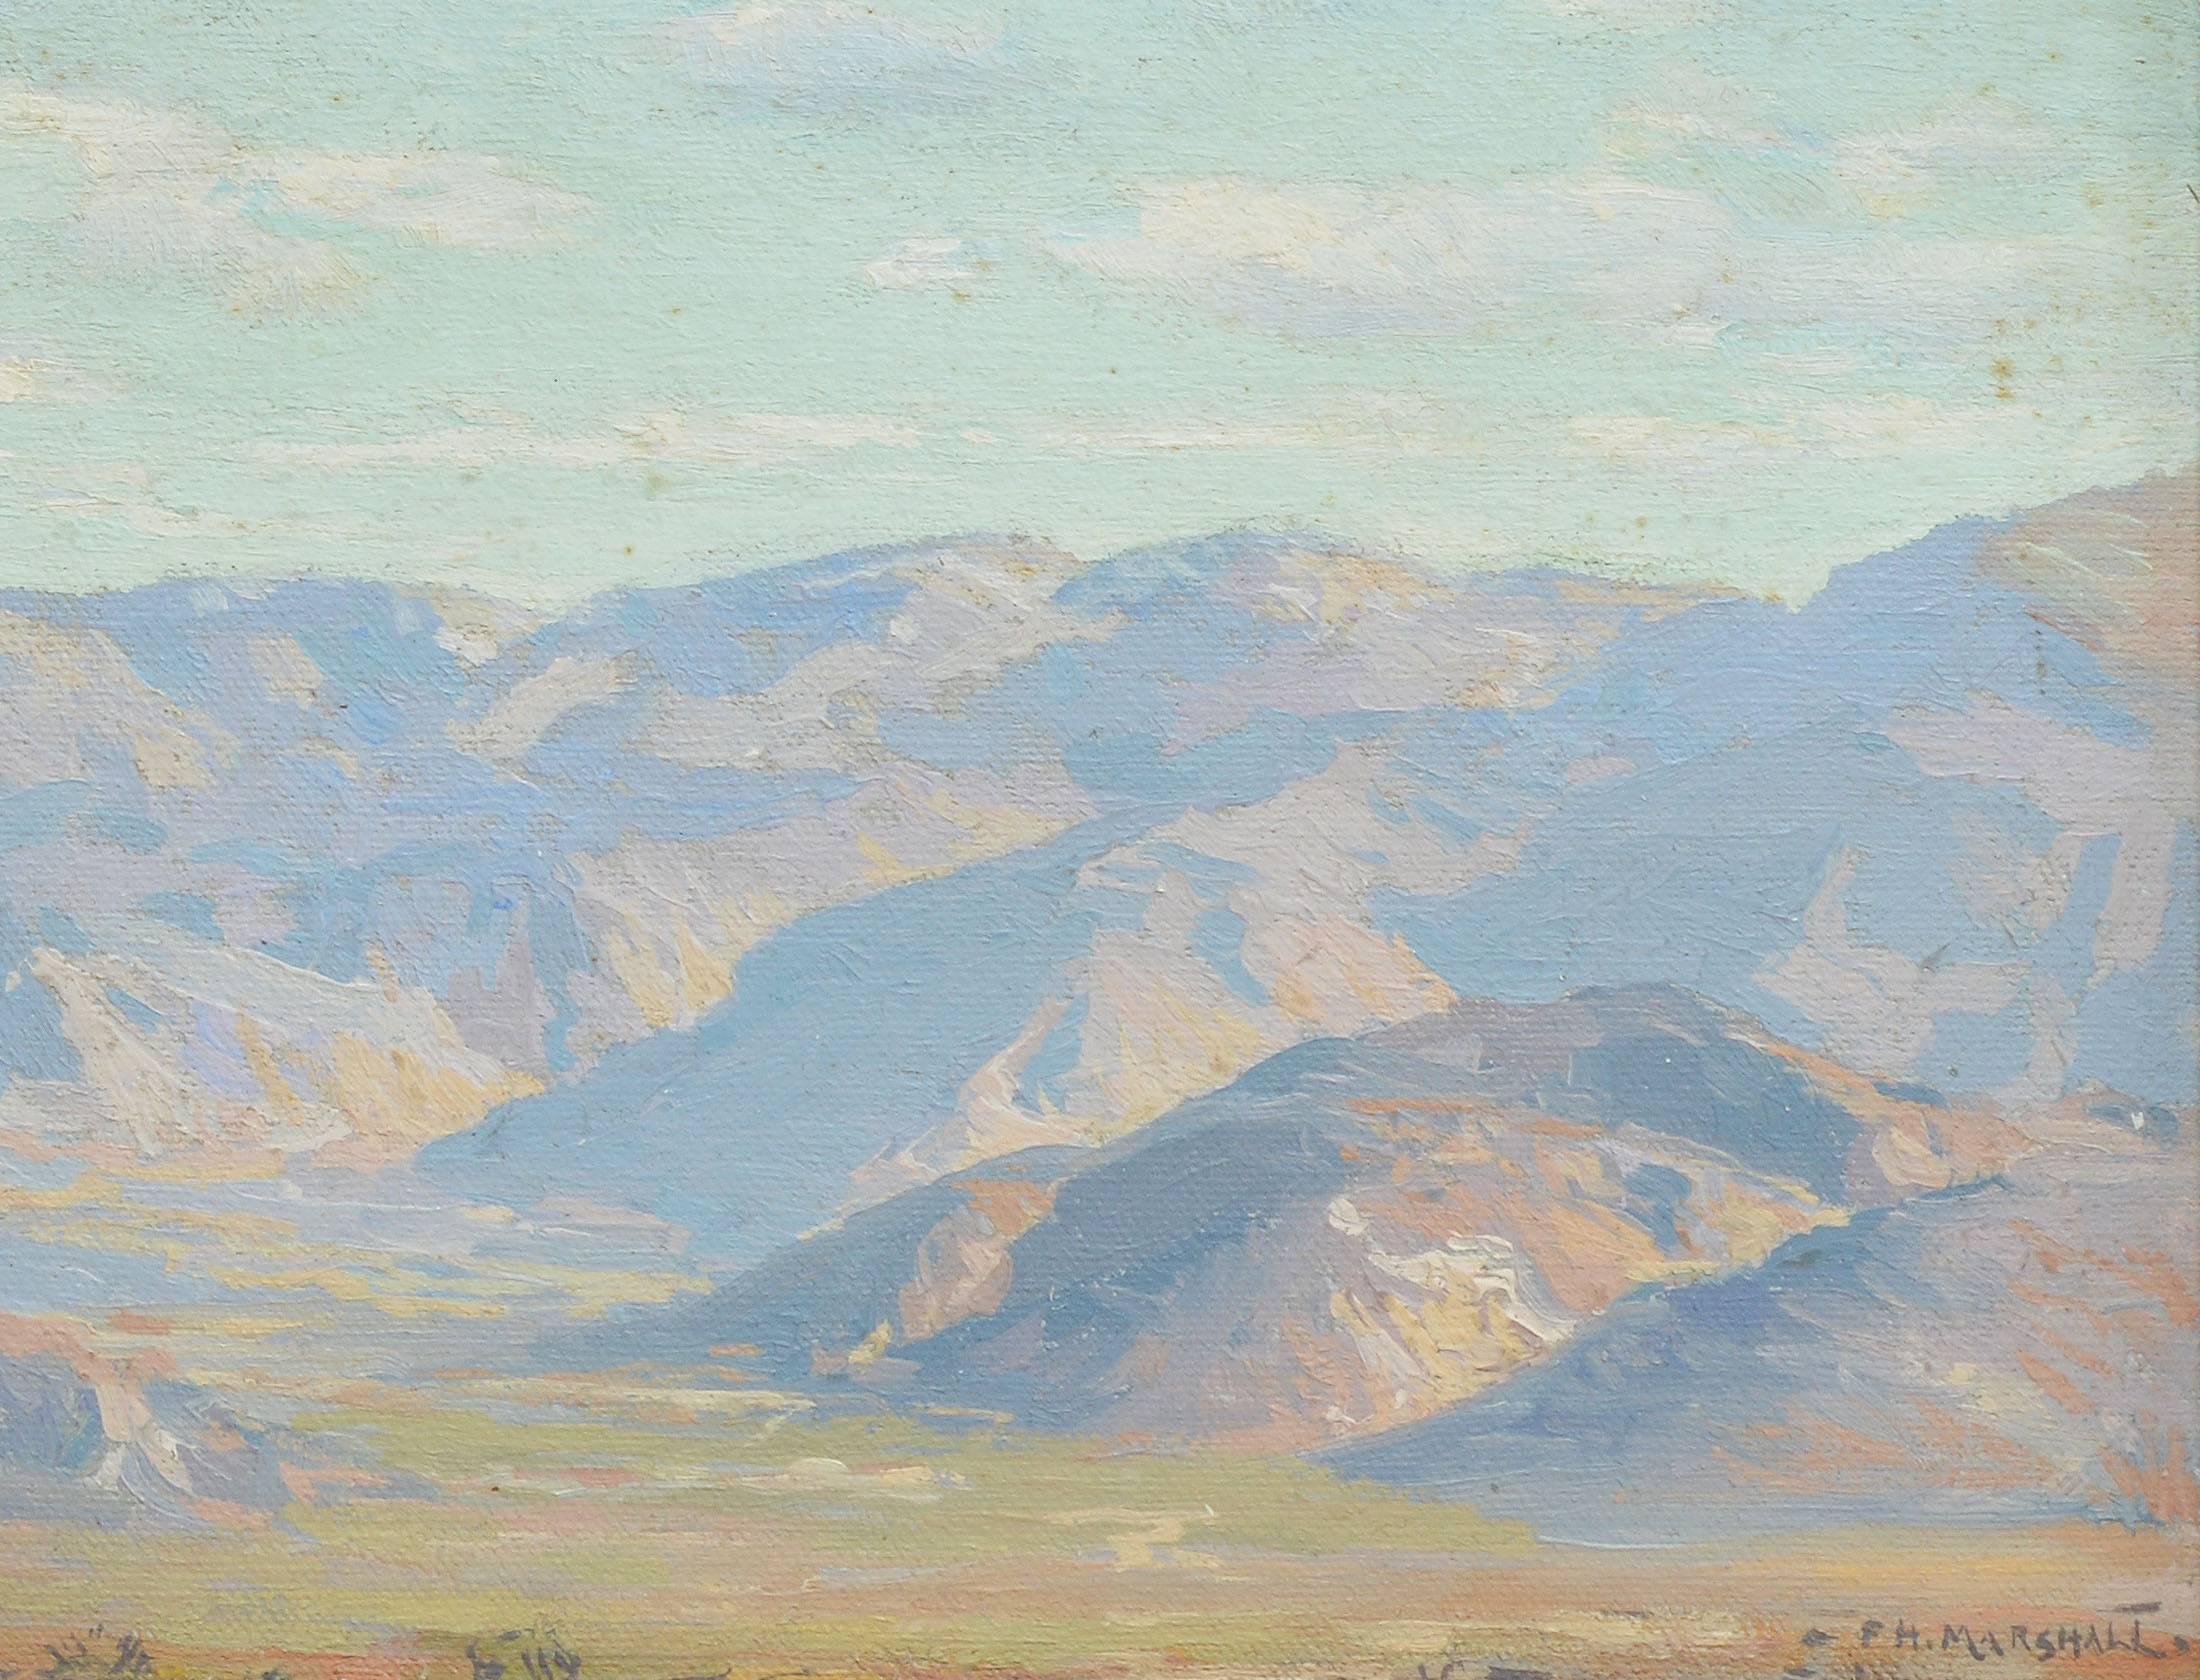 Banning Canyon, California, Plein Aire Impressionist Landscape by Frank Marshall 1